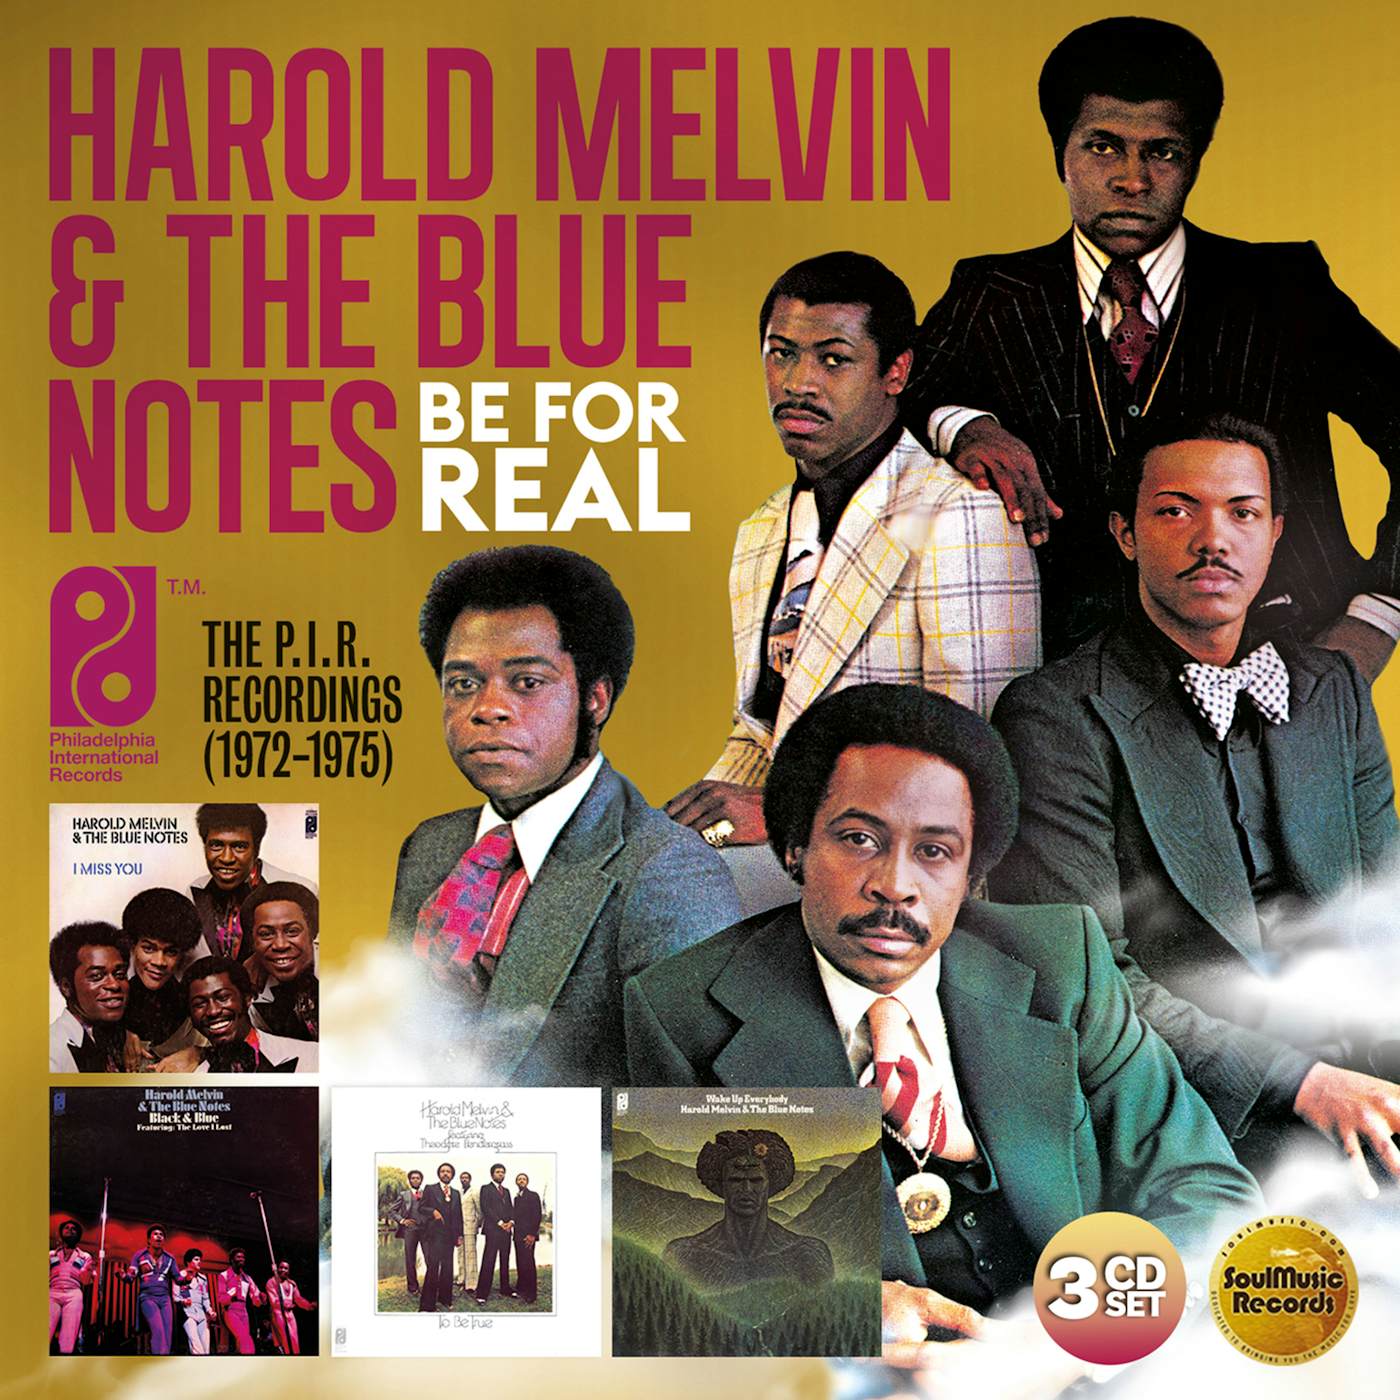 Harold Melvin & The Blue Notes BE FOR REAL: THE P.I.R. RECORDINGS 1972-1975 CD